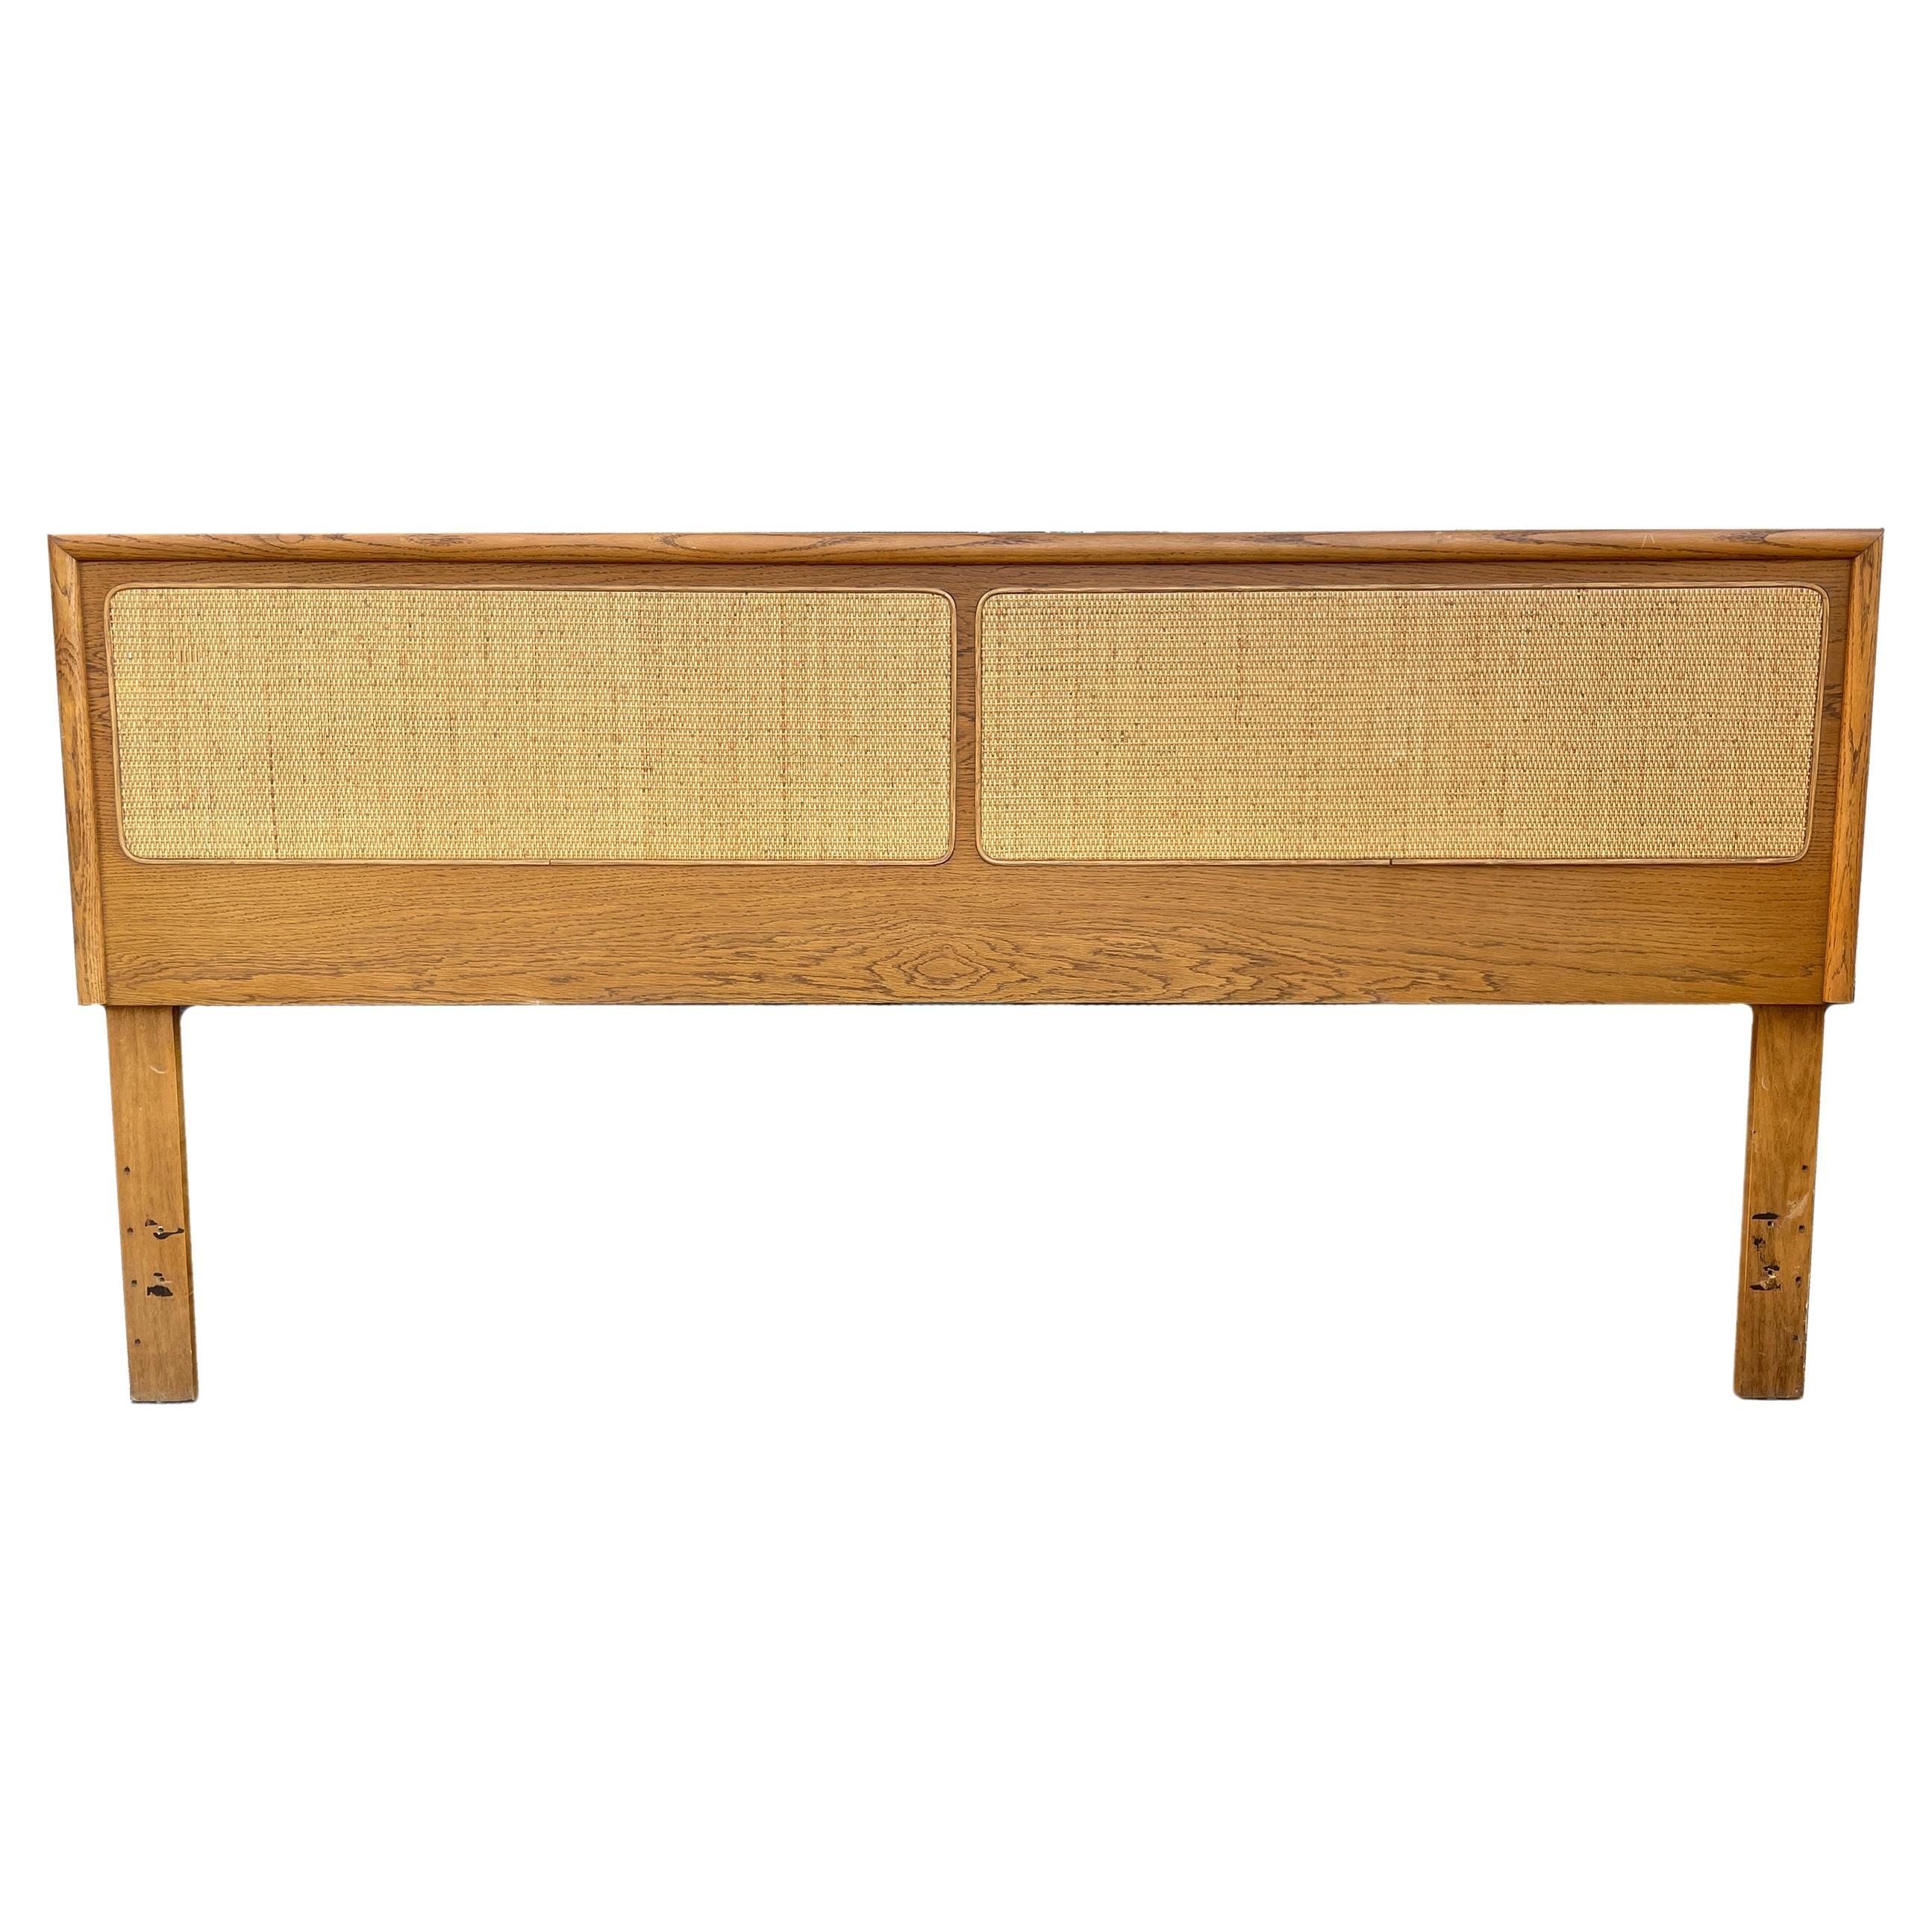 Mid-Century Modern Oak and Cane King Bed Headboard by Lane